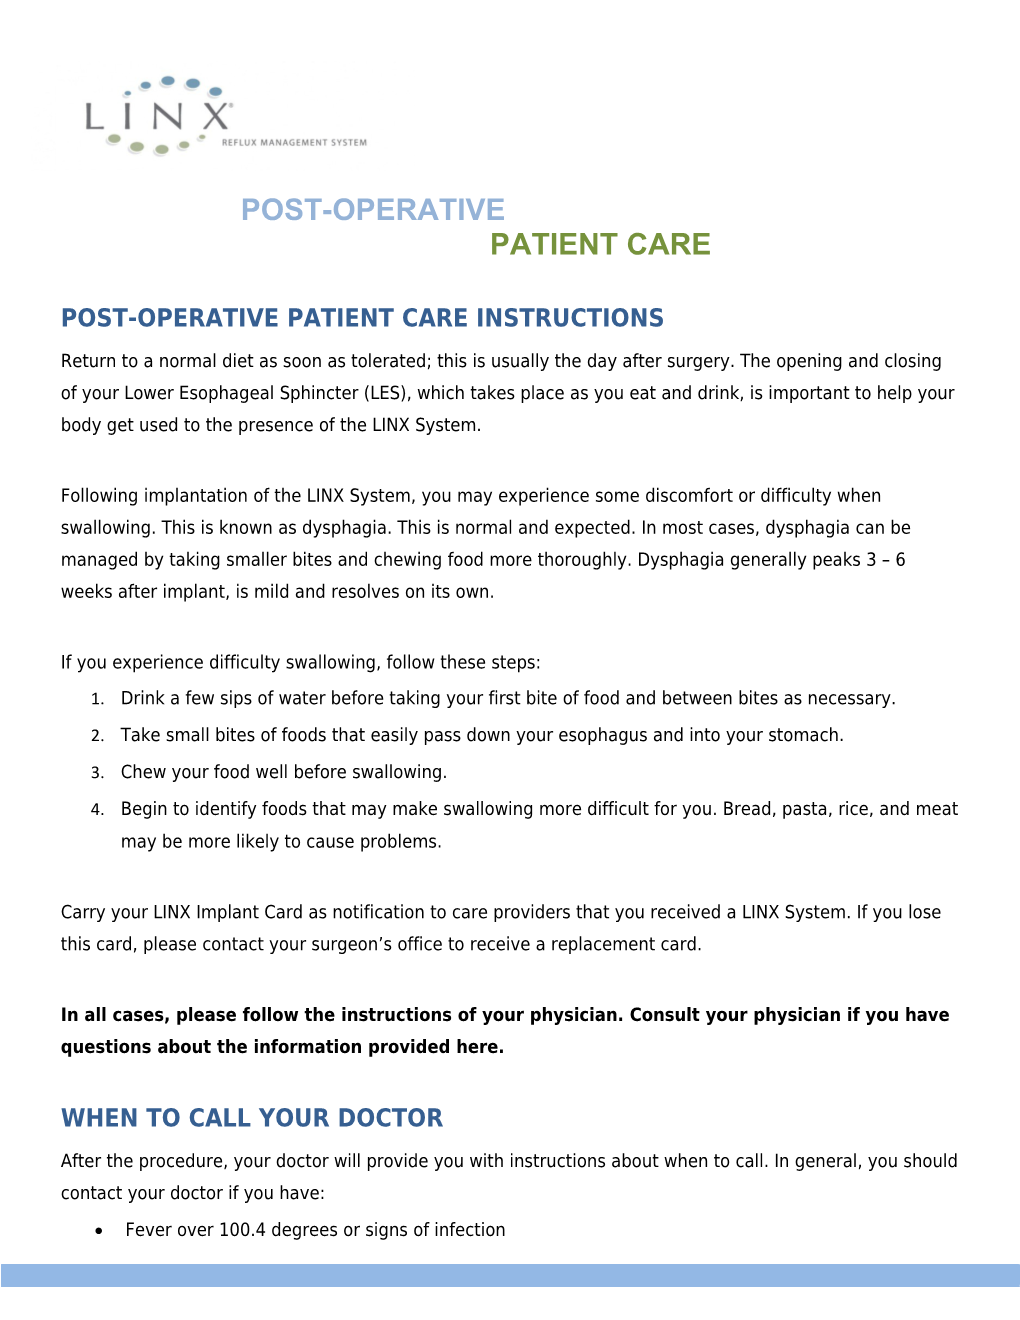 Post-Operative Patient Care Instructions